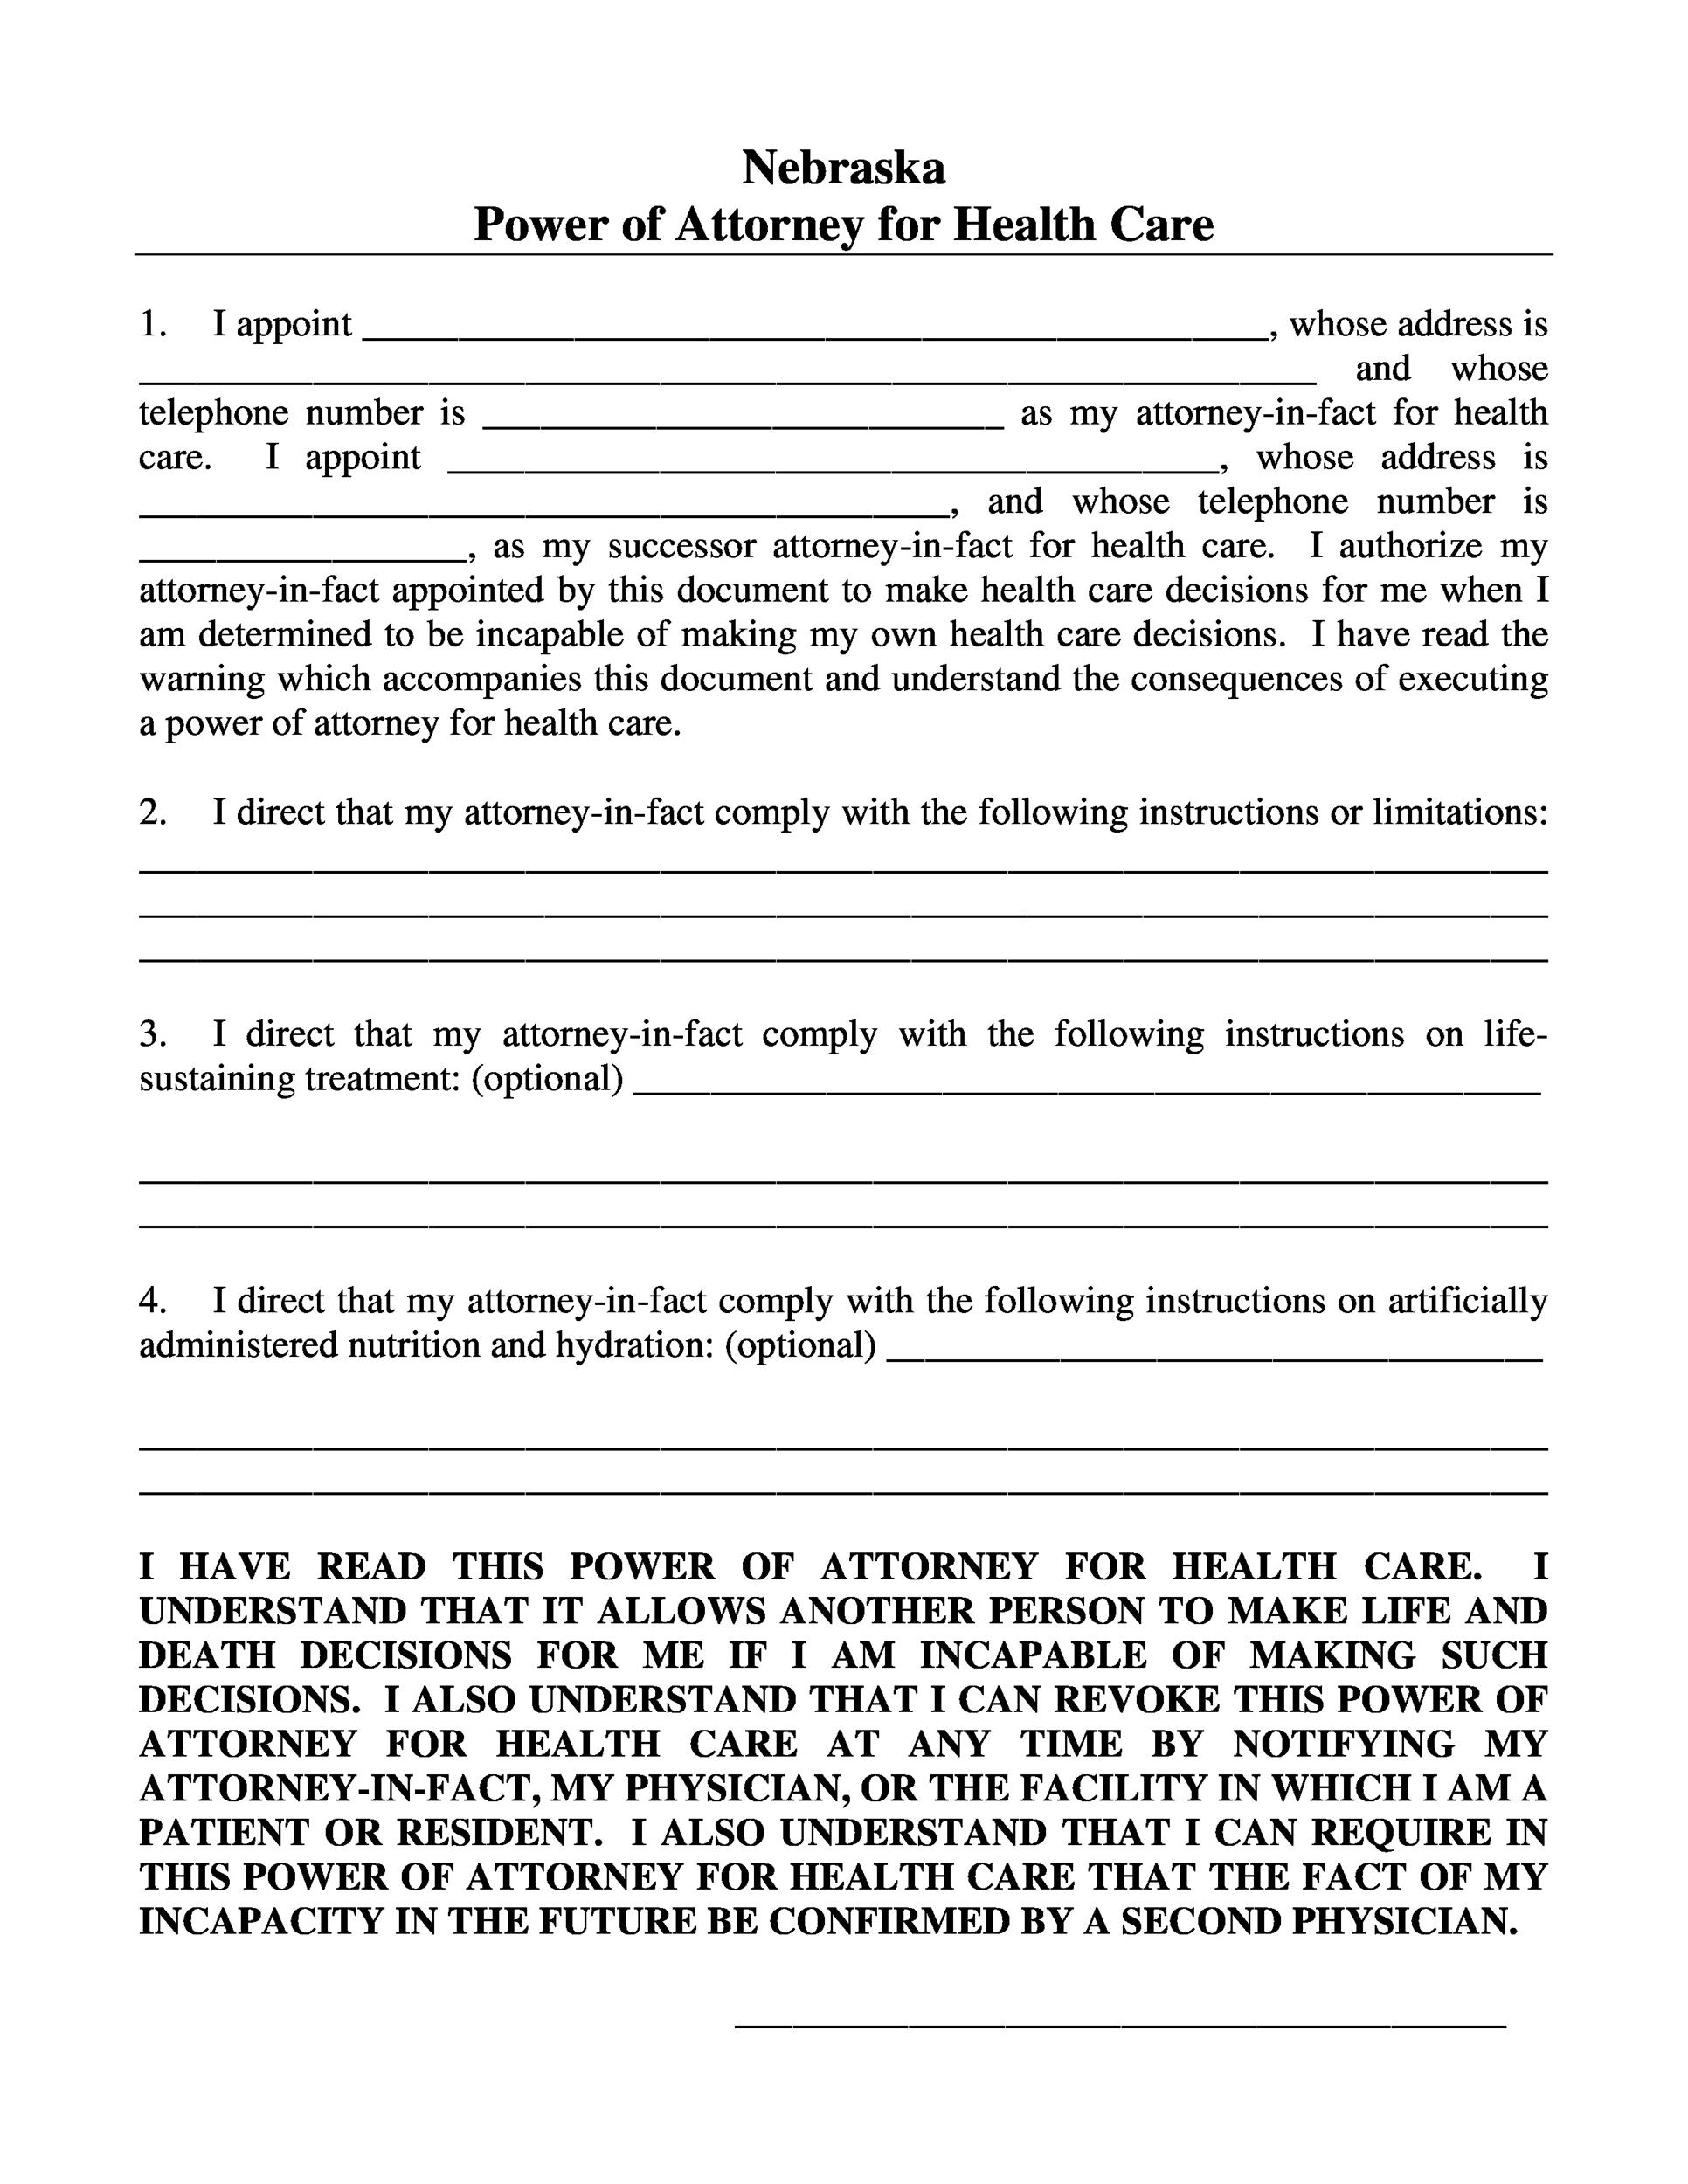 power of attorney forms free download